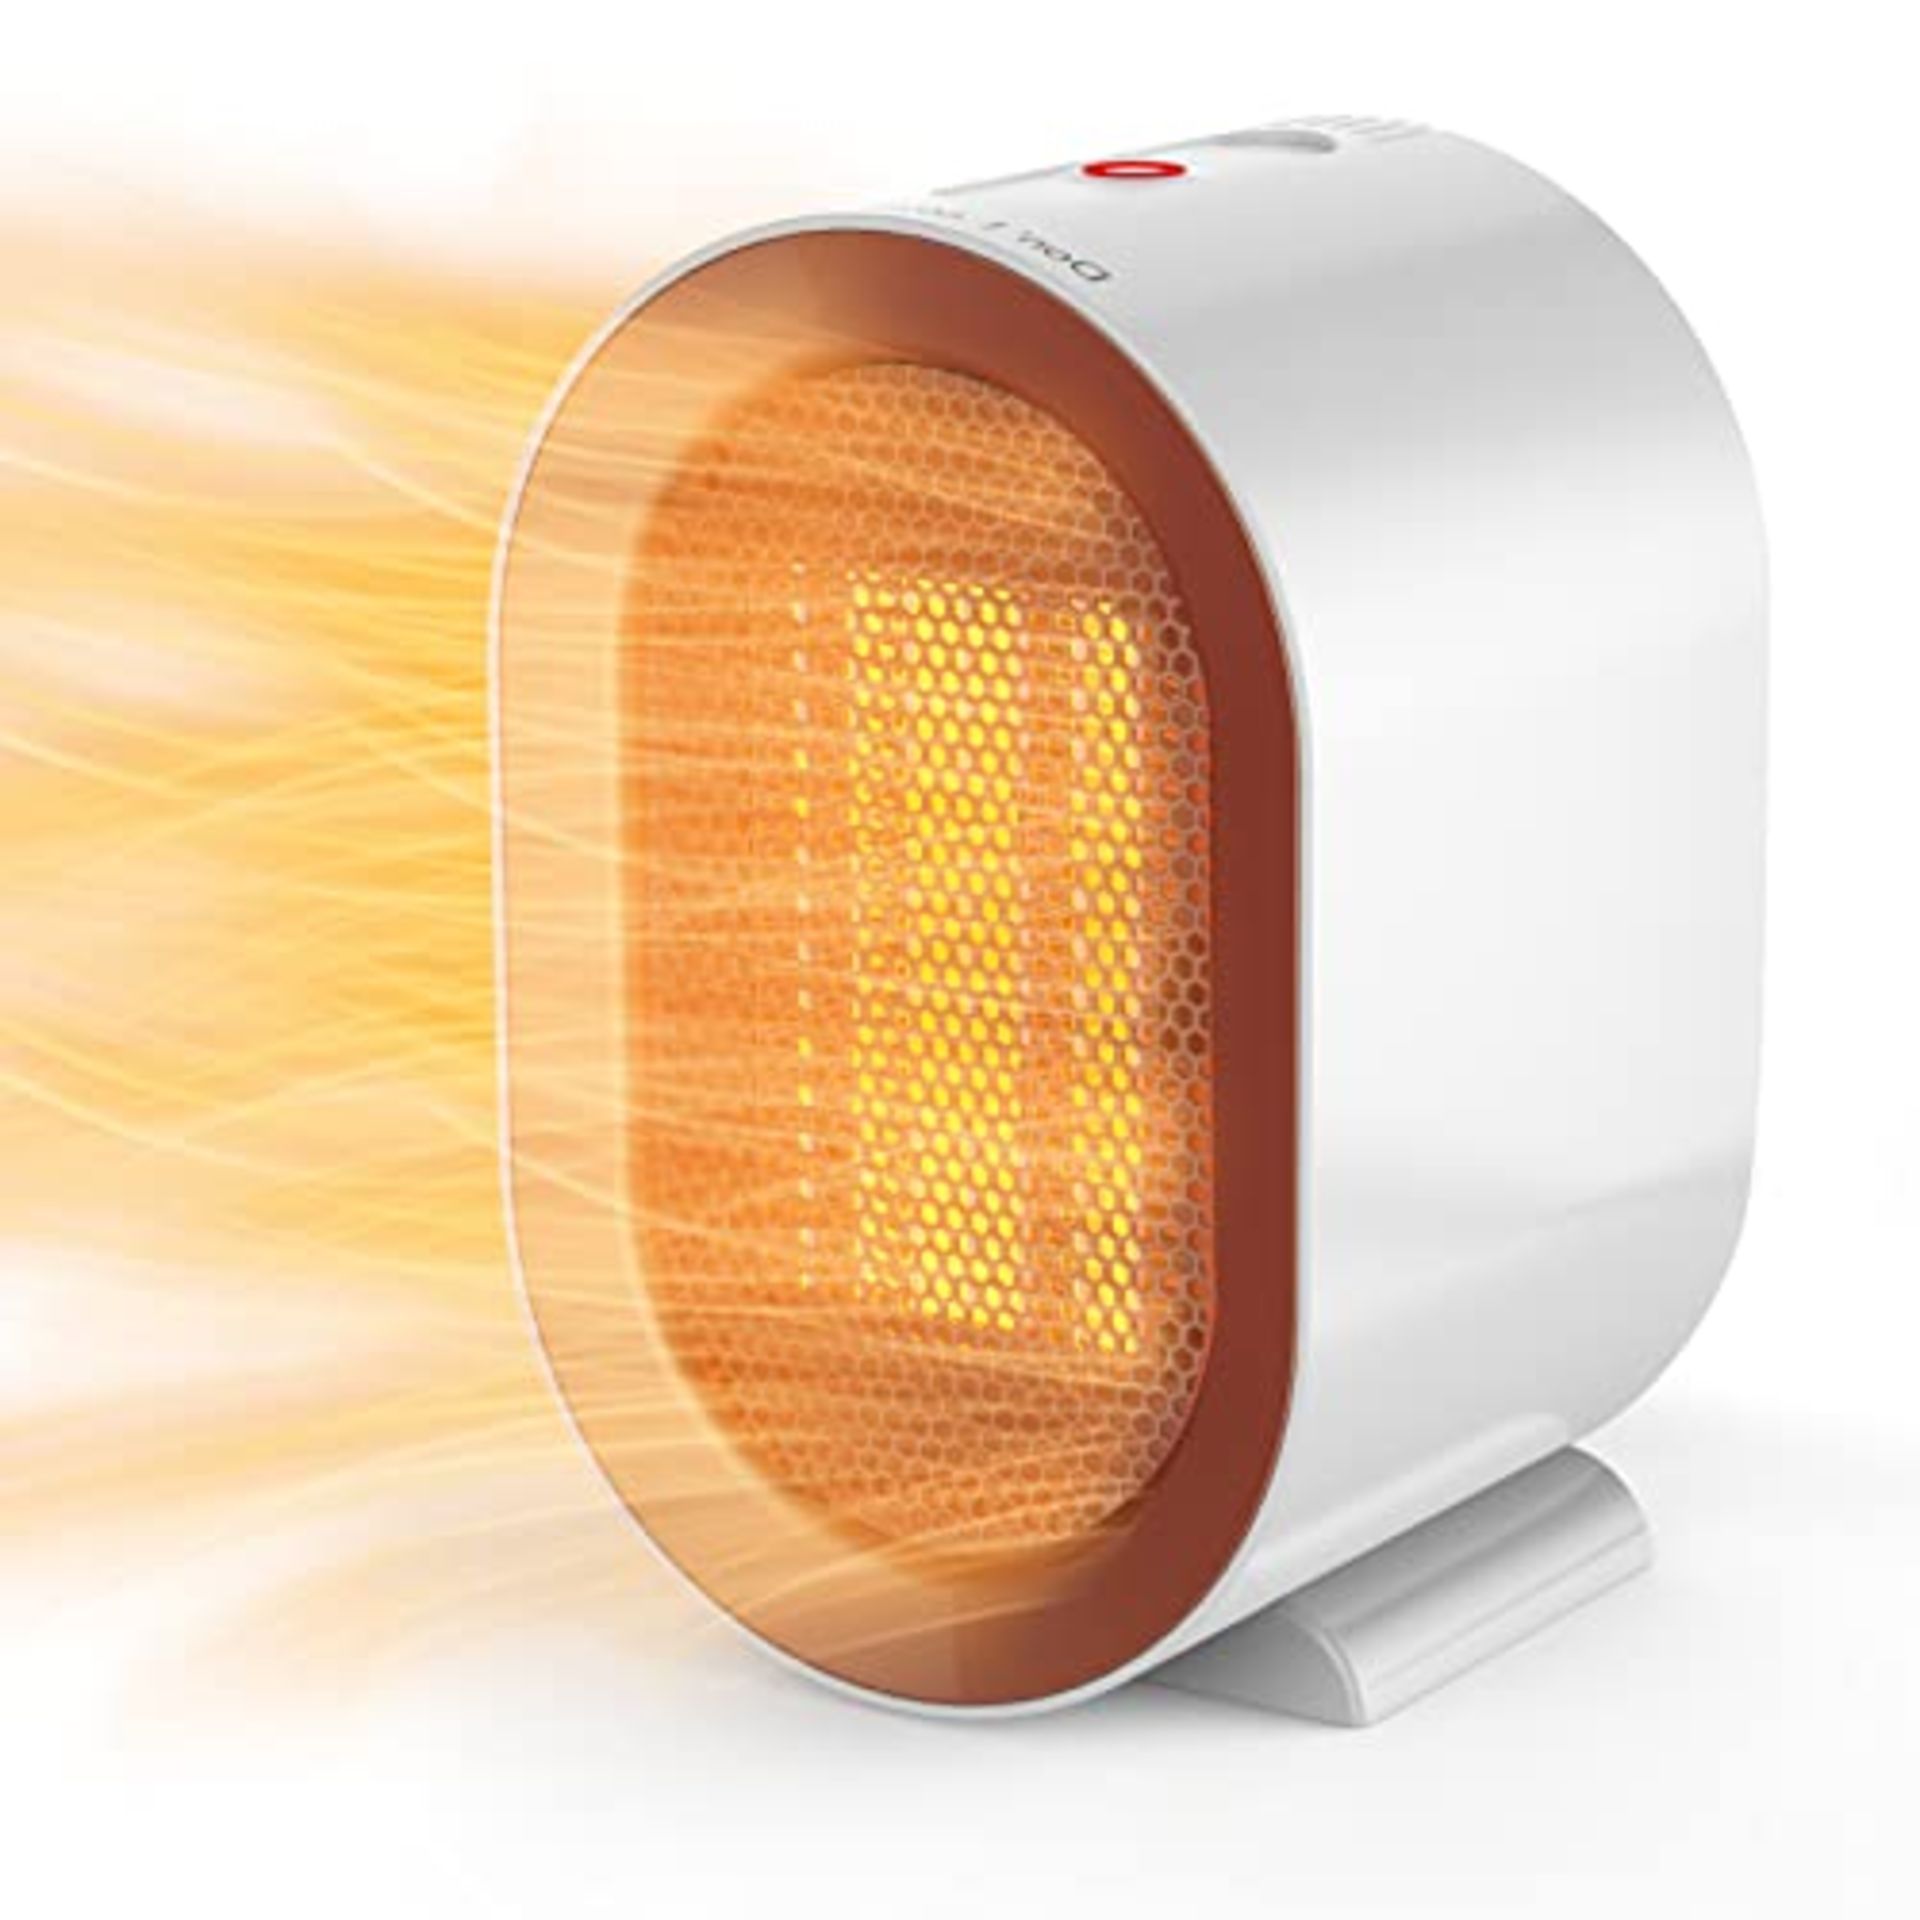 Electric Heater, Space Heater with 1200W/ 800W Heating Modes Portable Ceramic Plug in